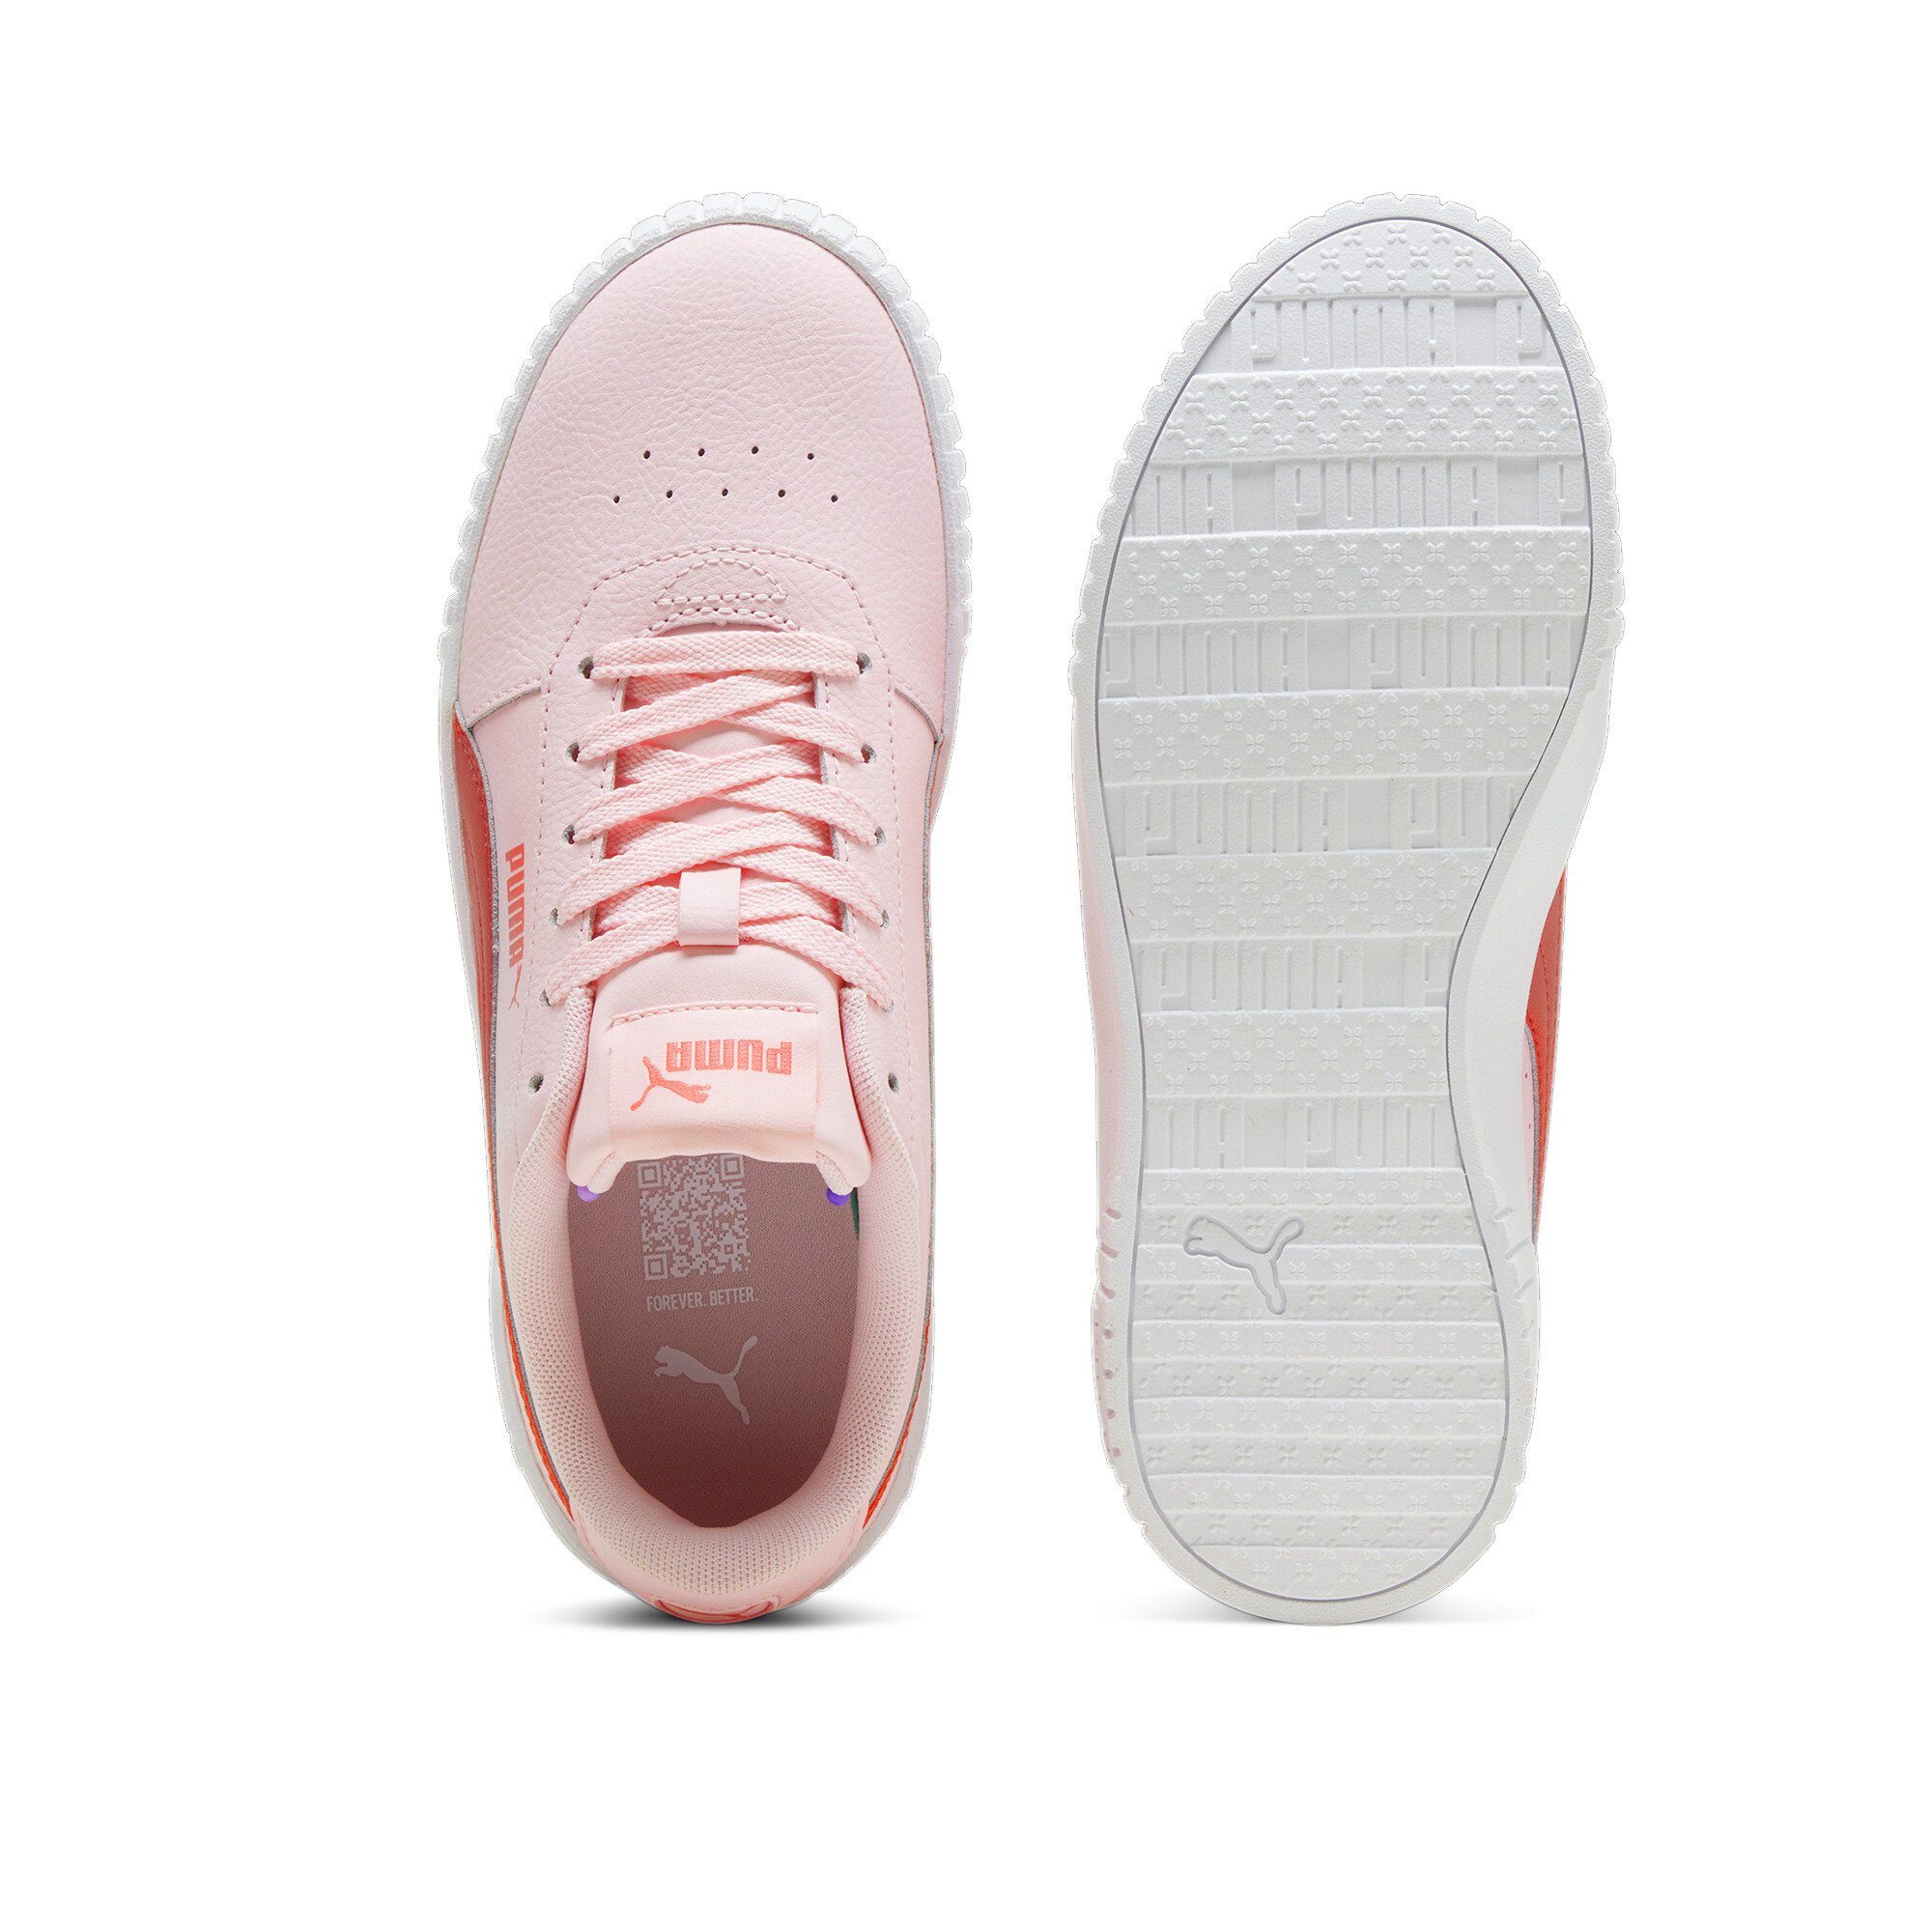 Whisp Pink Active Jugendliche Sneaker White 2.0 Sneakers Red Of Carina PUMA